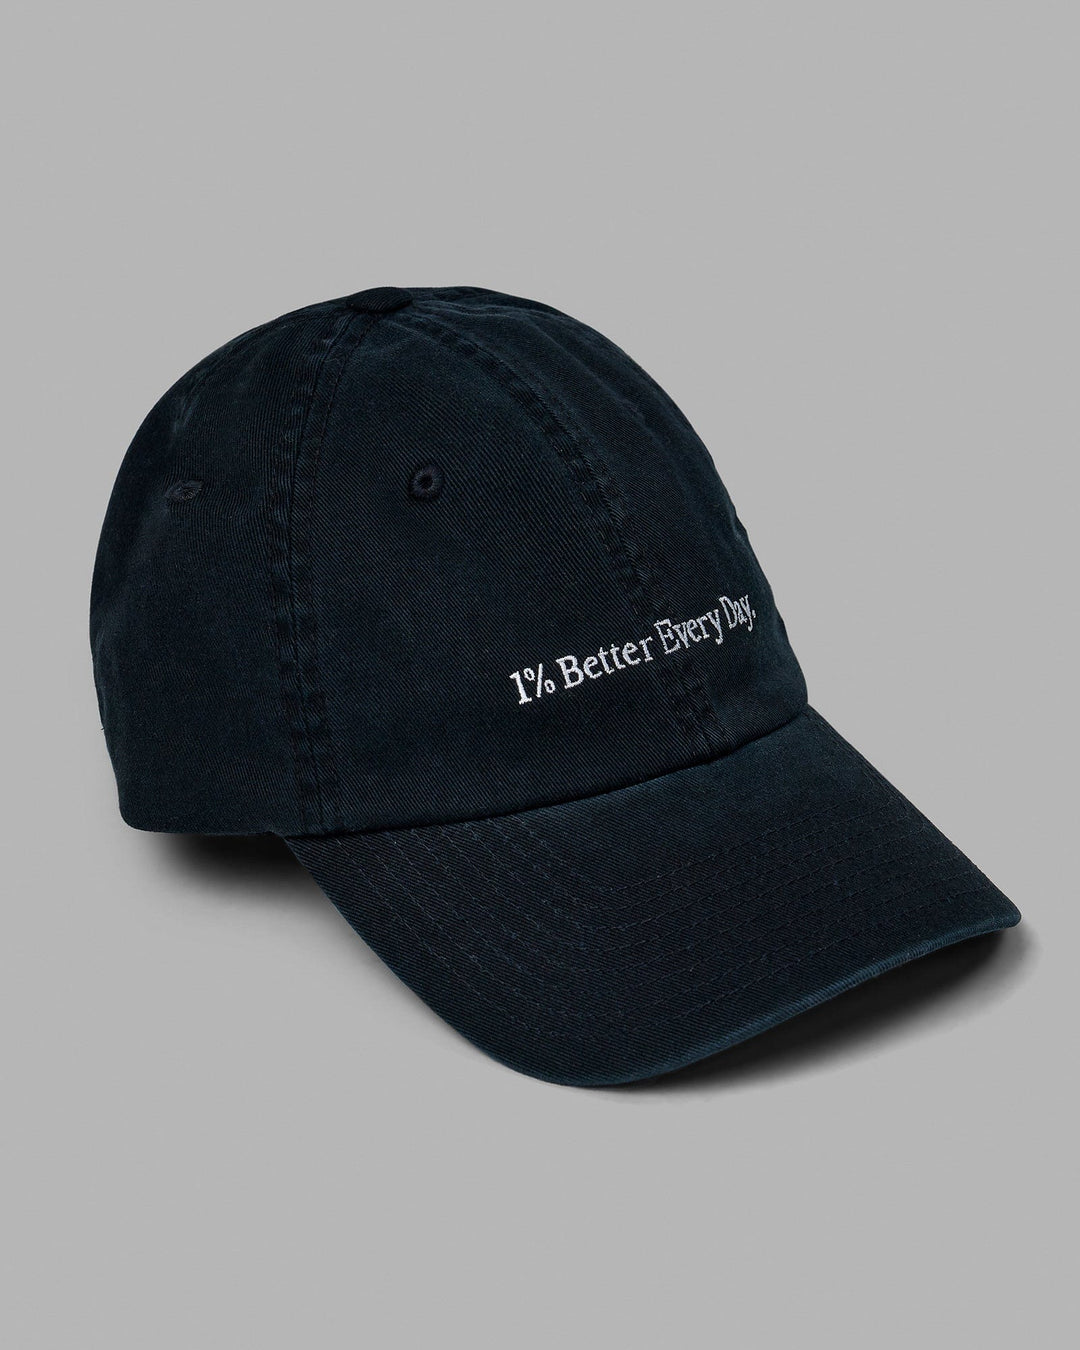 Washed 1% Better Cap - Black-White